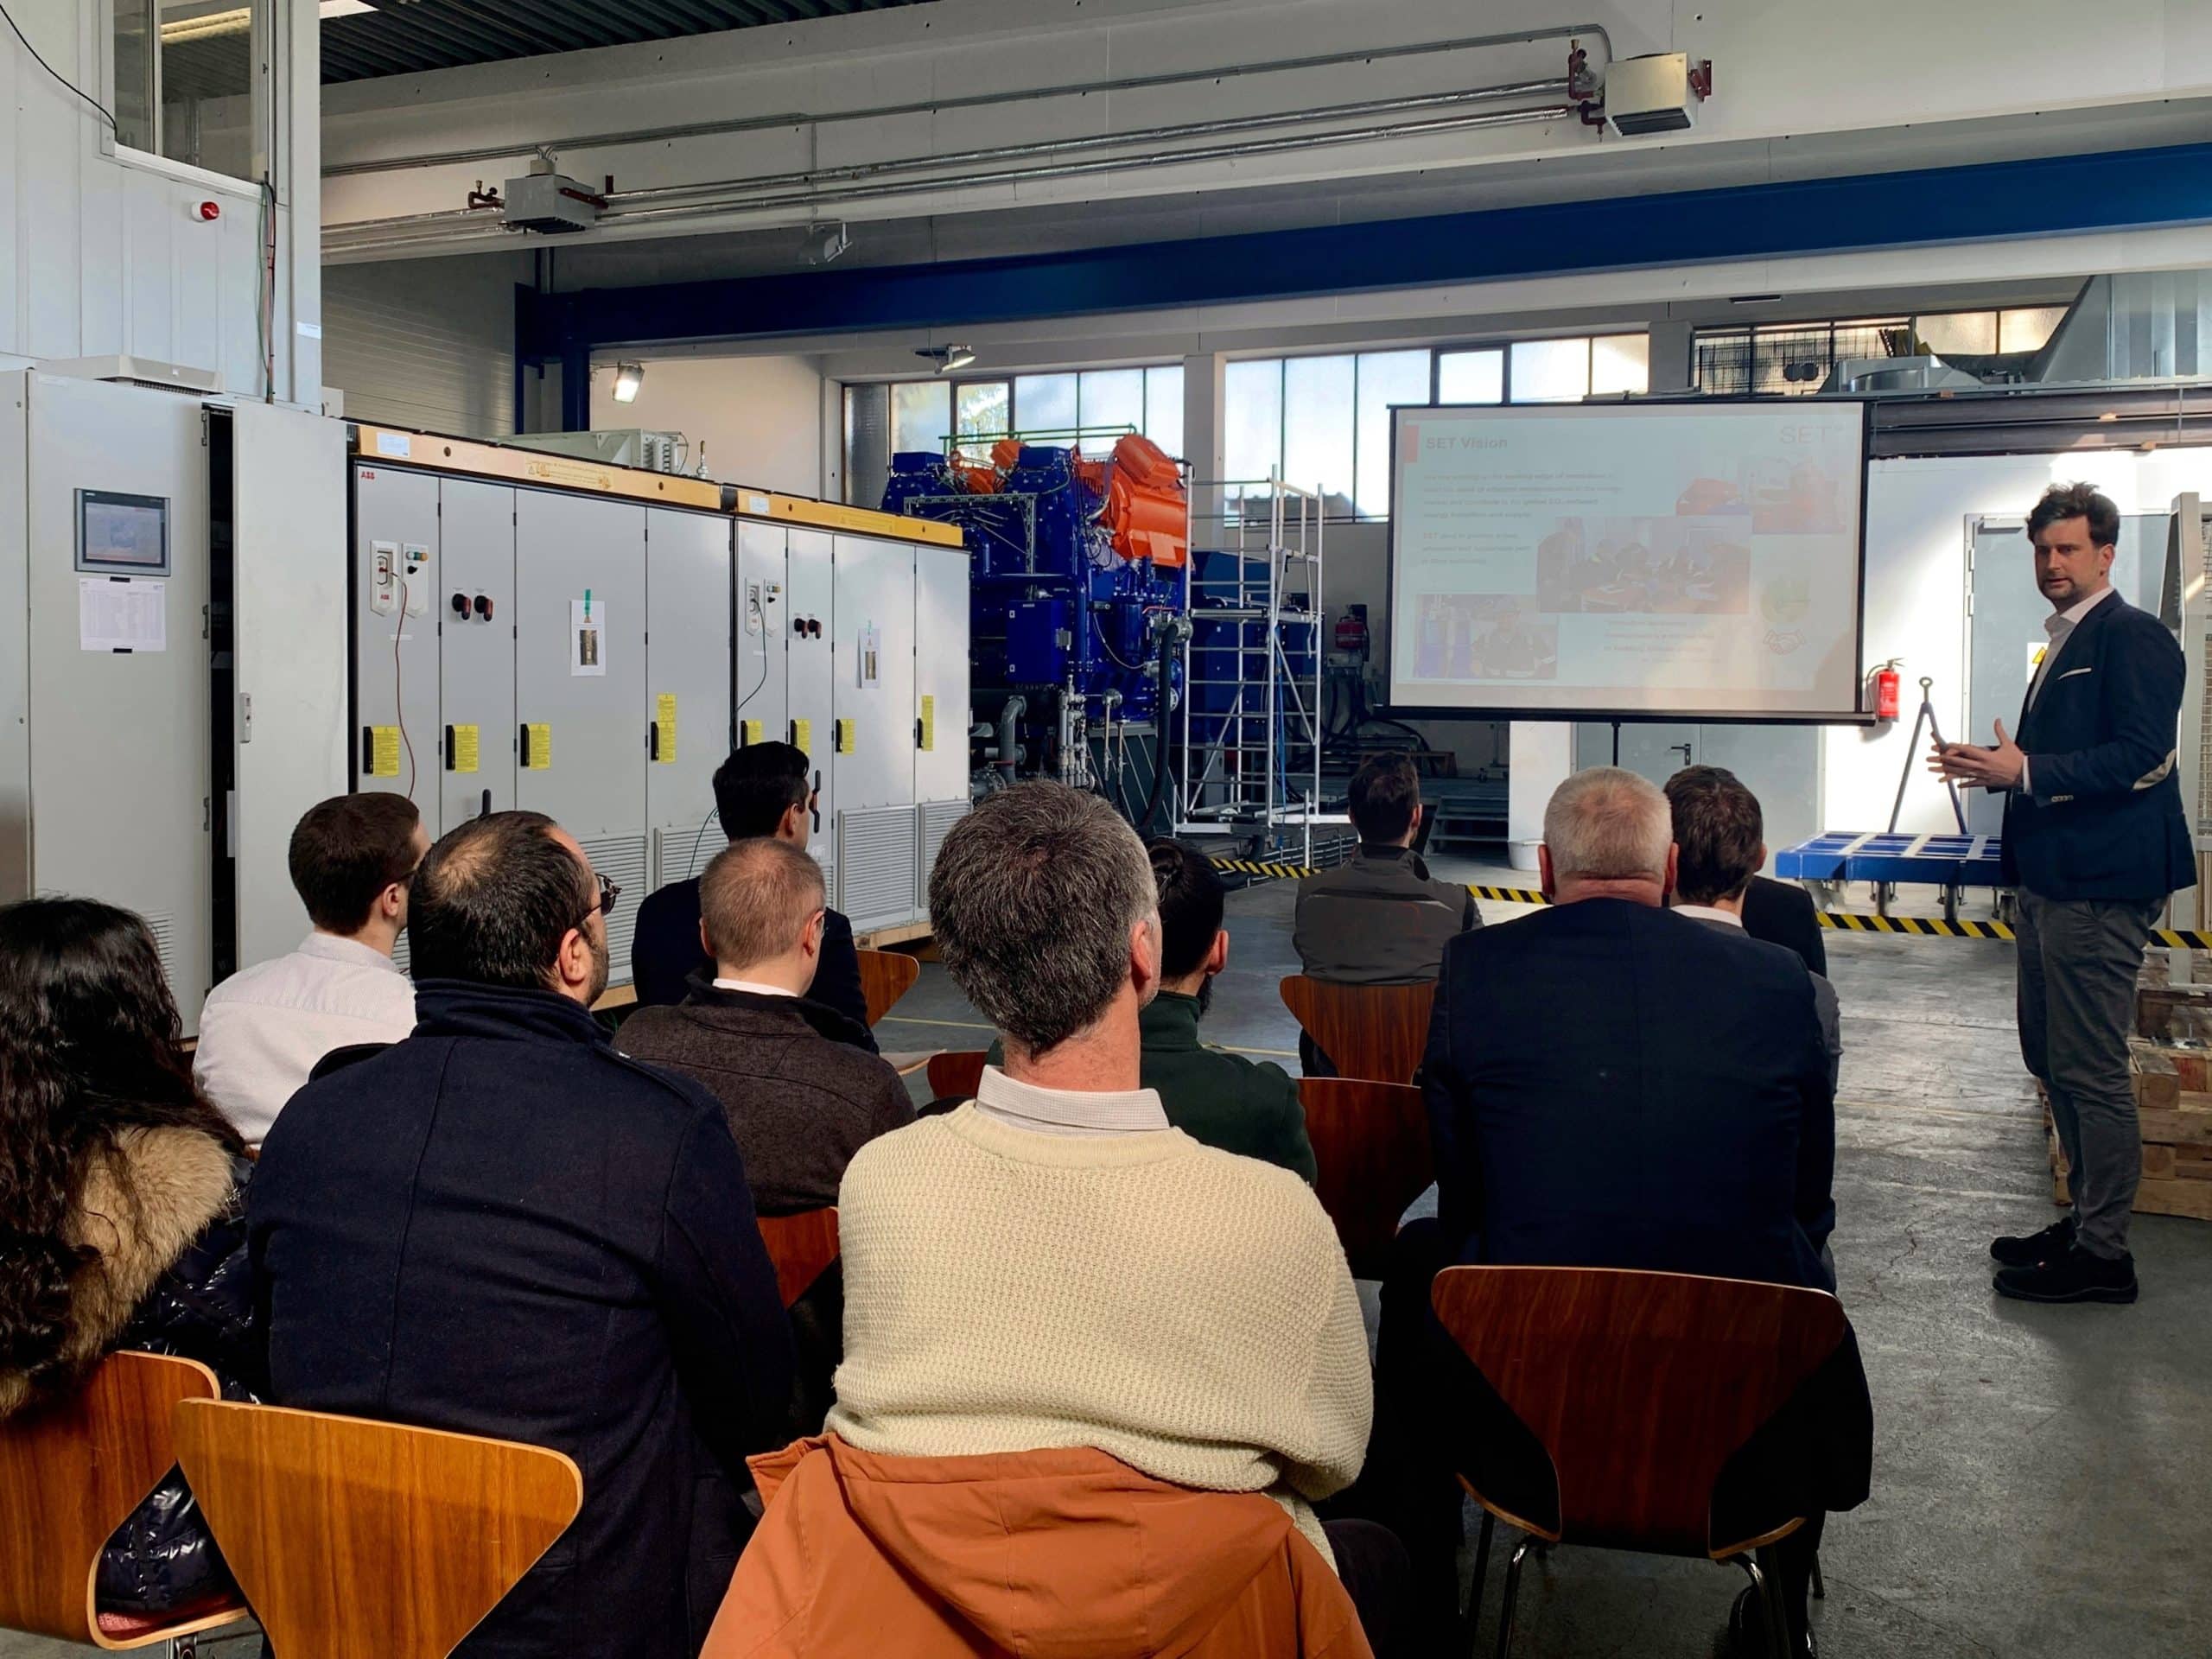 Exclusive presentation of the newest SE-R model of #SETCON variable speed gearbox took place this week. The SET team was thrilled to welcome our business partners to the SET head office in Klagenfurt.
The guests had a unique opportunity to participate in the demonstrative test runs of the #SETCON gearbox. The model has shown high performance and energy savings of app. 1 MW on average.